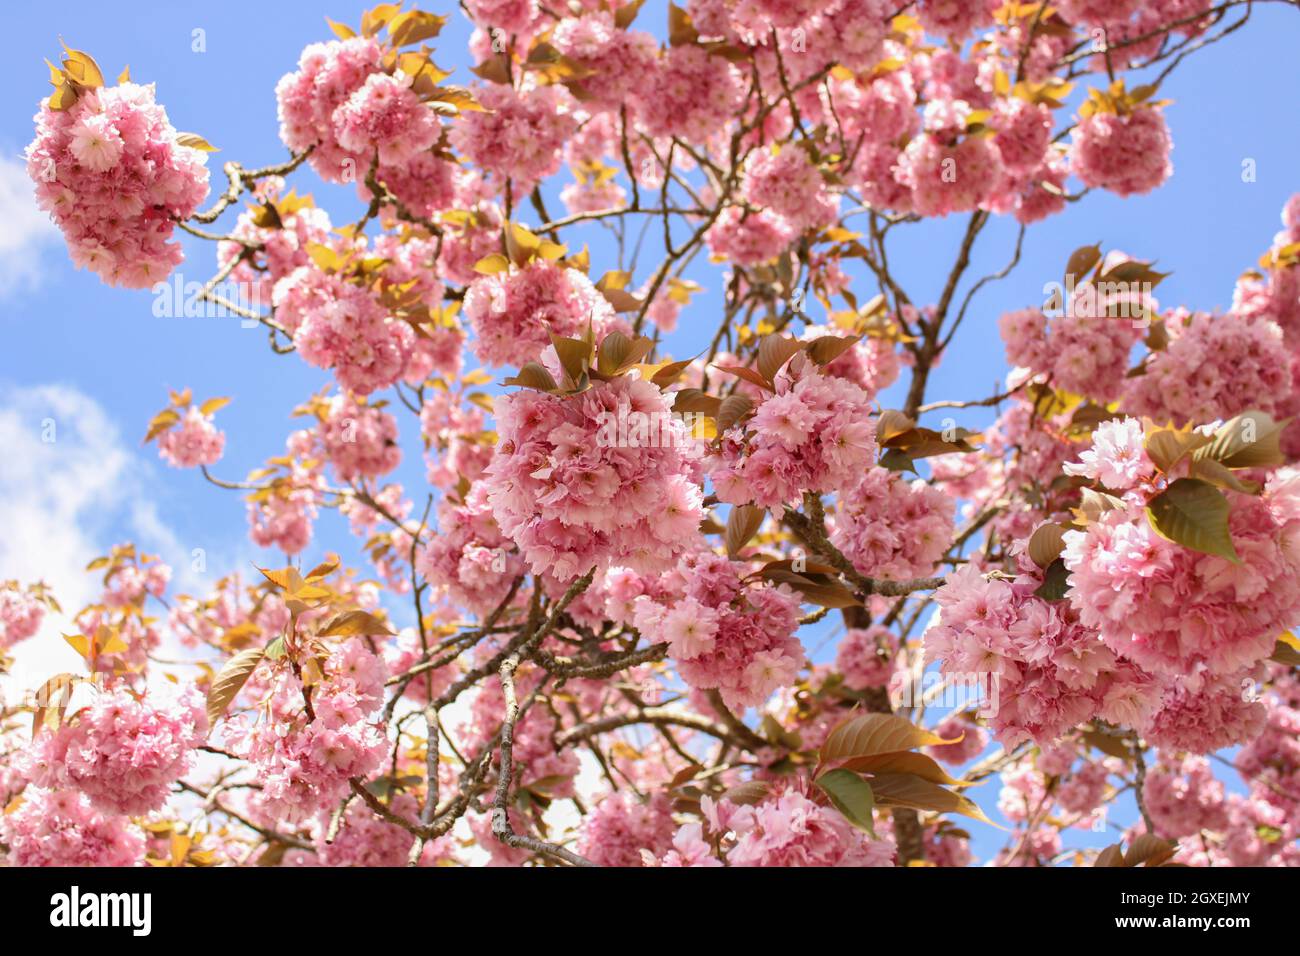 Japanese Cherry Blossom tree in spring Stock Photo